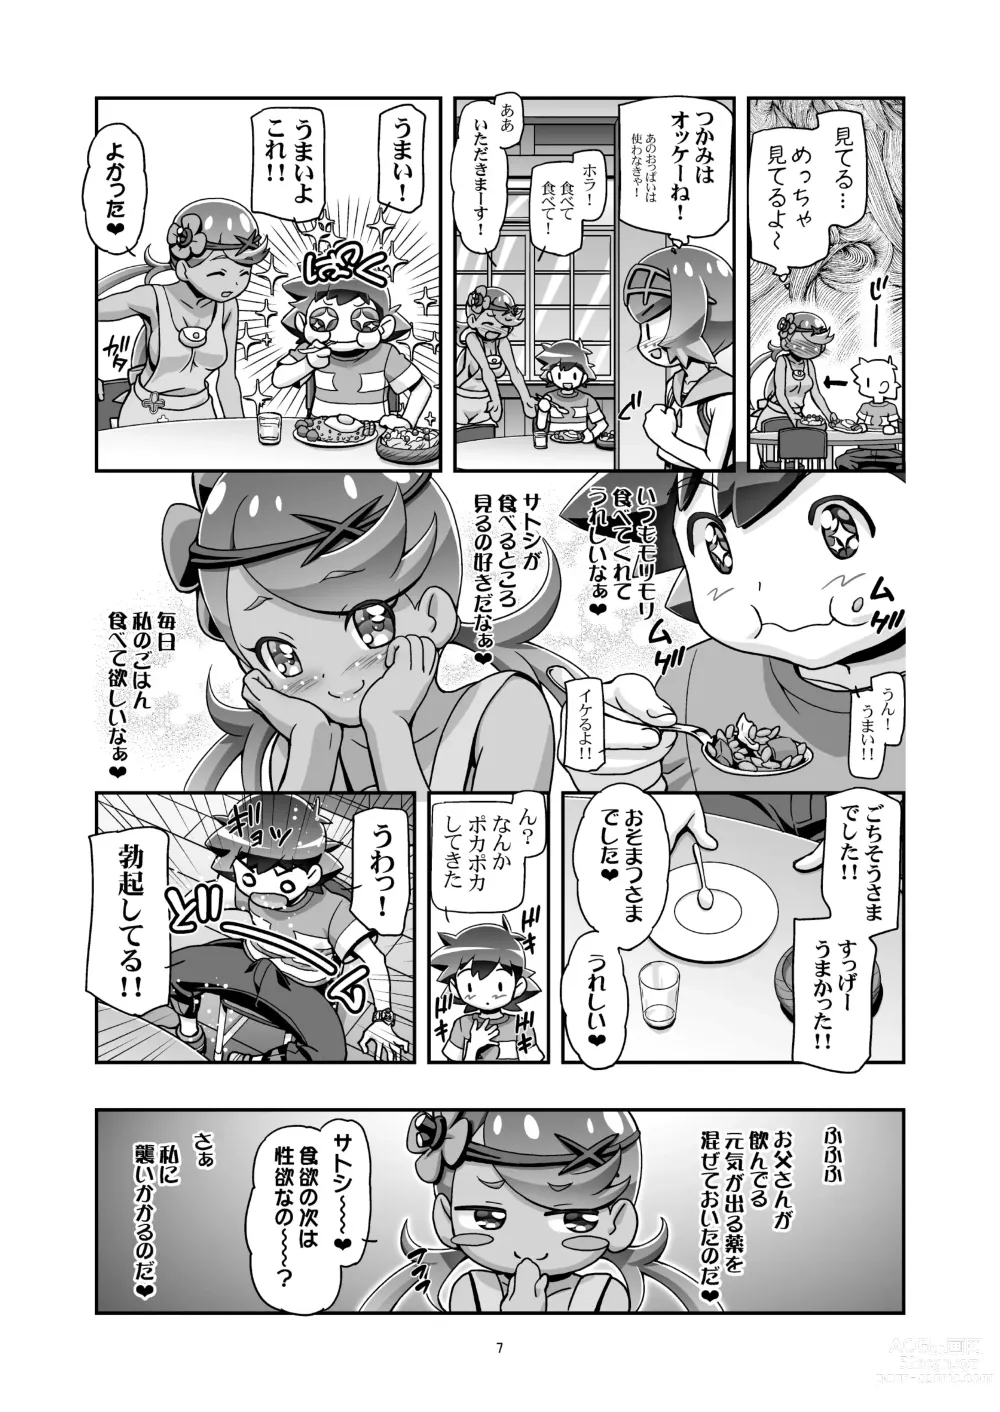 Page 6 of doujinshi PM GALS SUNMOON MALLOW